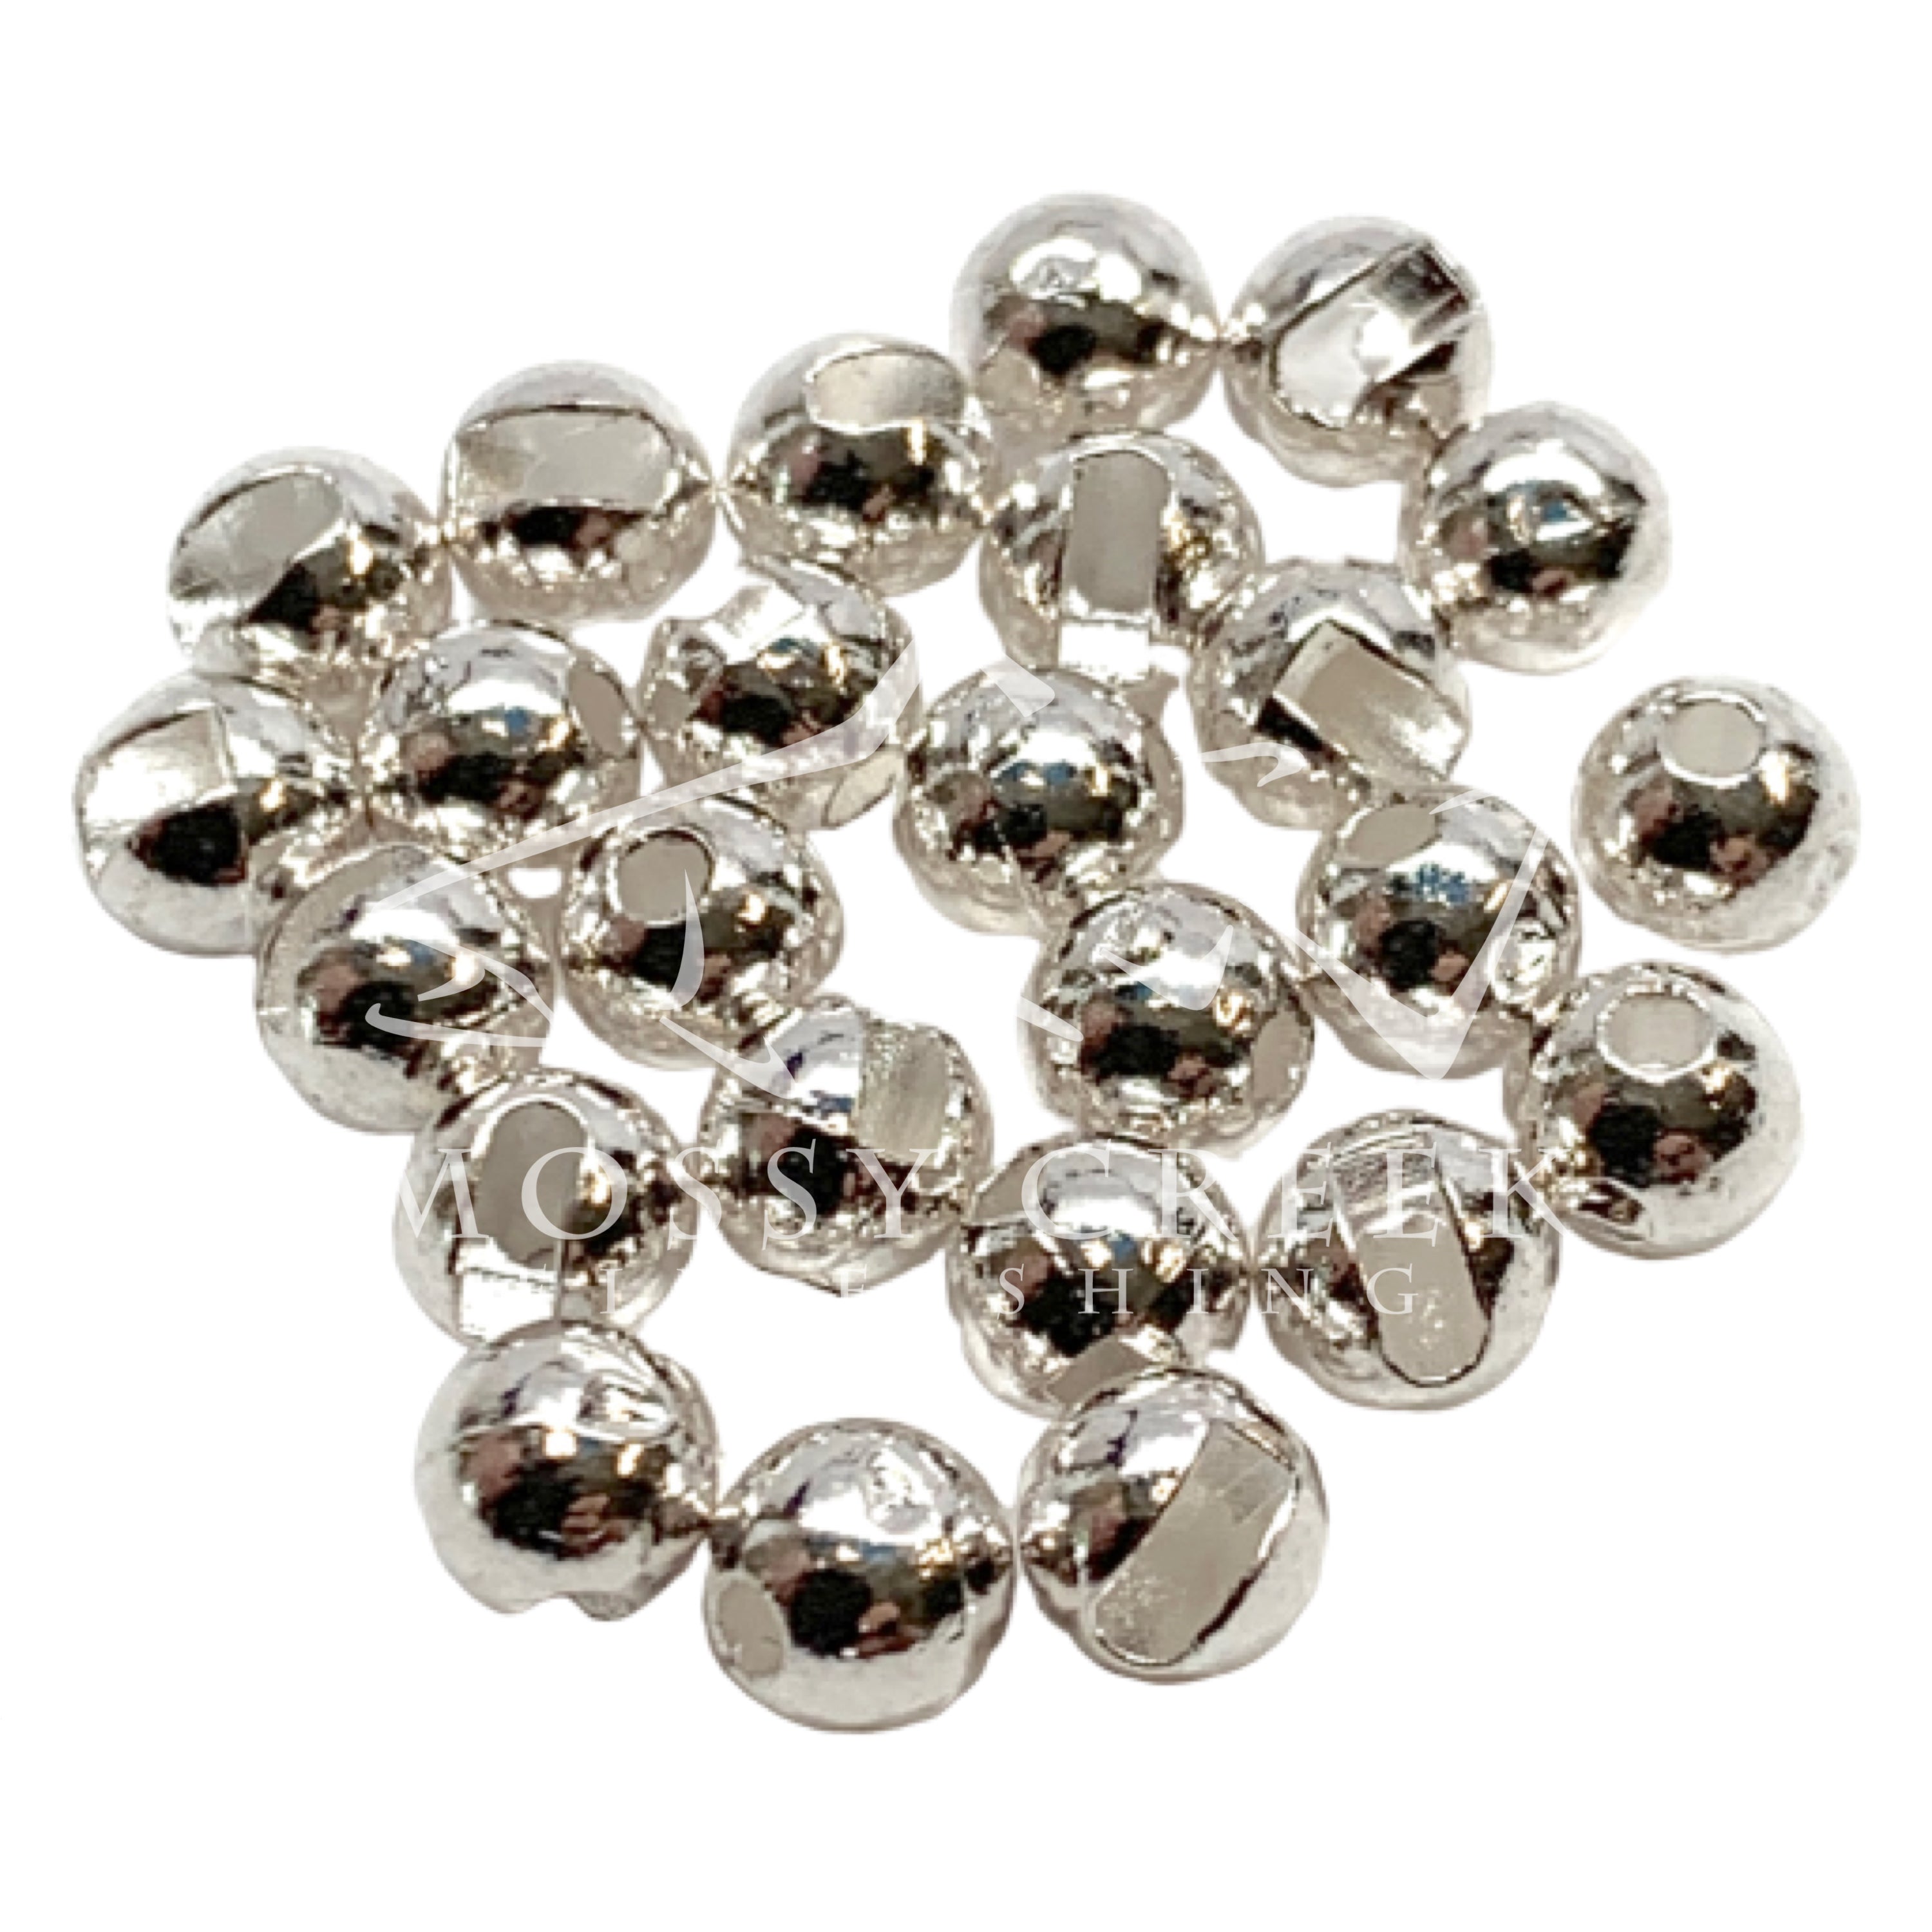 Metallic Tungsten Beads for Fly Tying - 25 Pack 3.8 mm / Metallic Olive